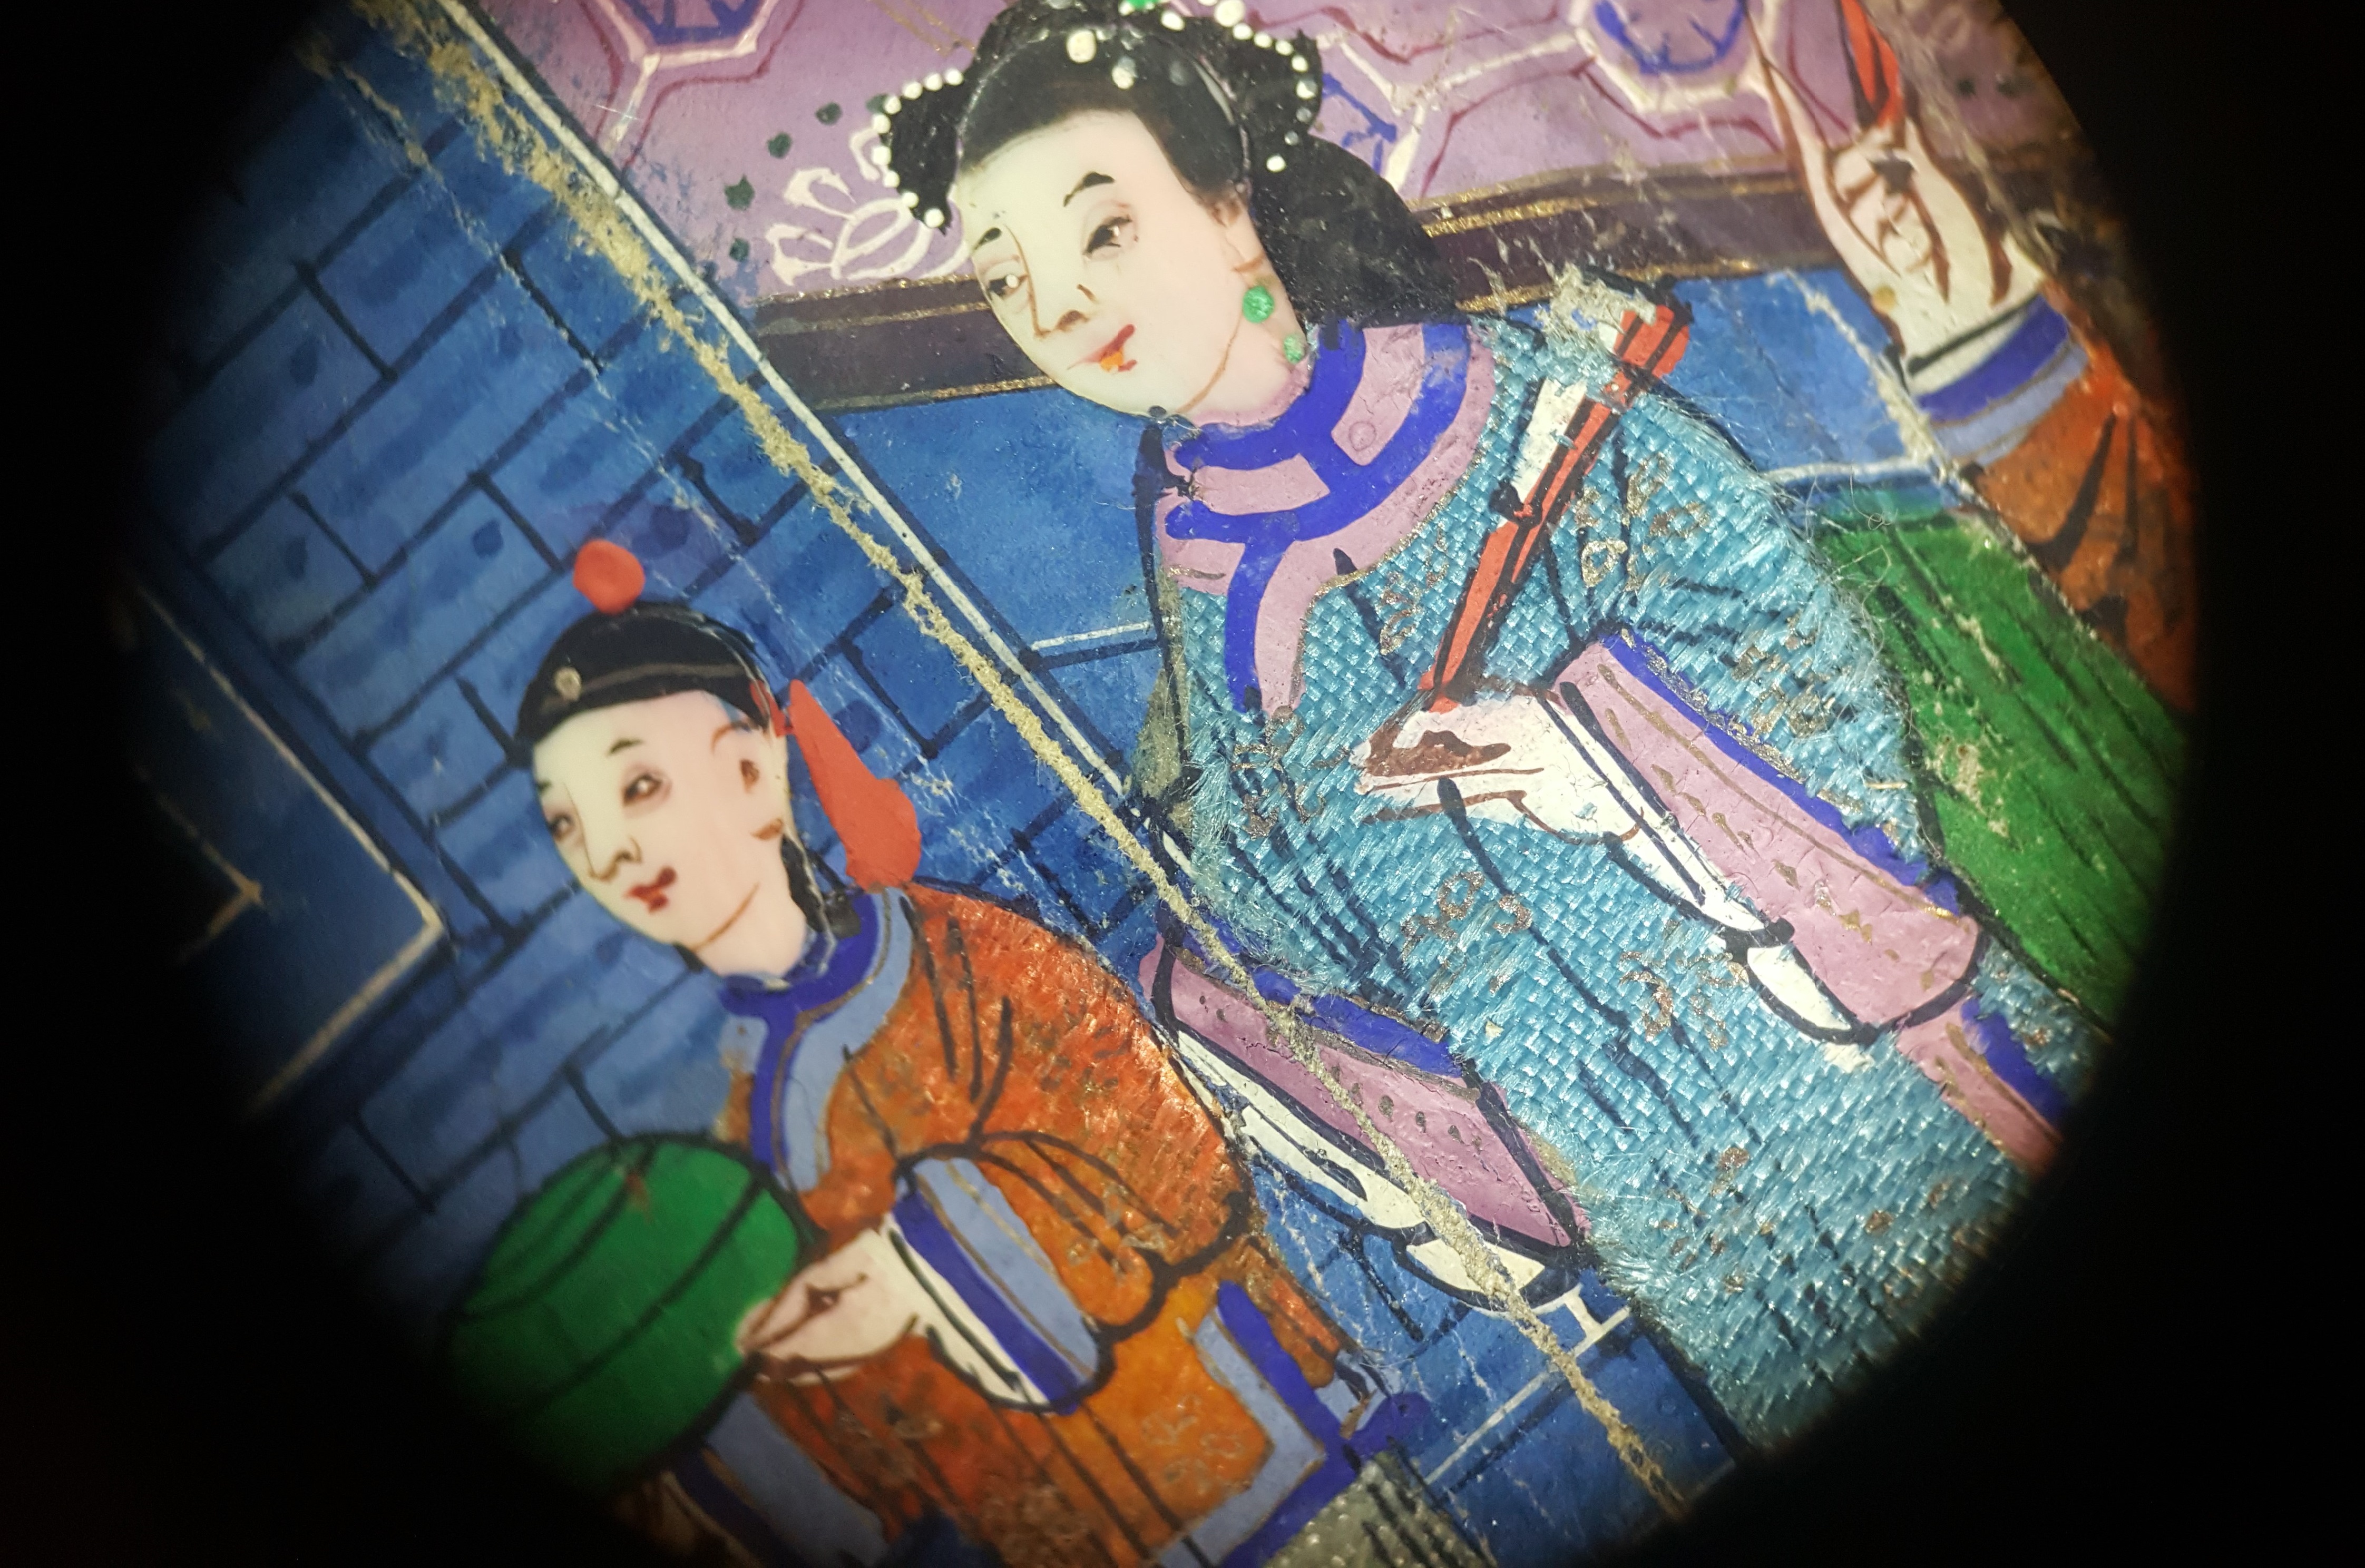 A close detail of two small figures on the fan, of a young man in an orange robe and a woman in a blue robe in front of a blue wall, showing the finely painted woven textile and ivory faces